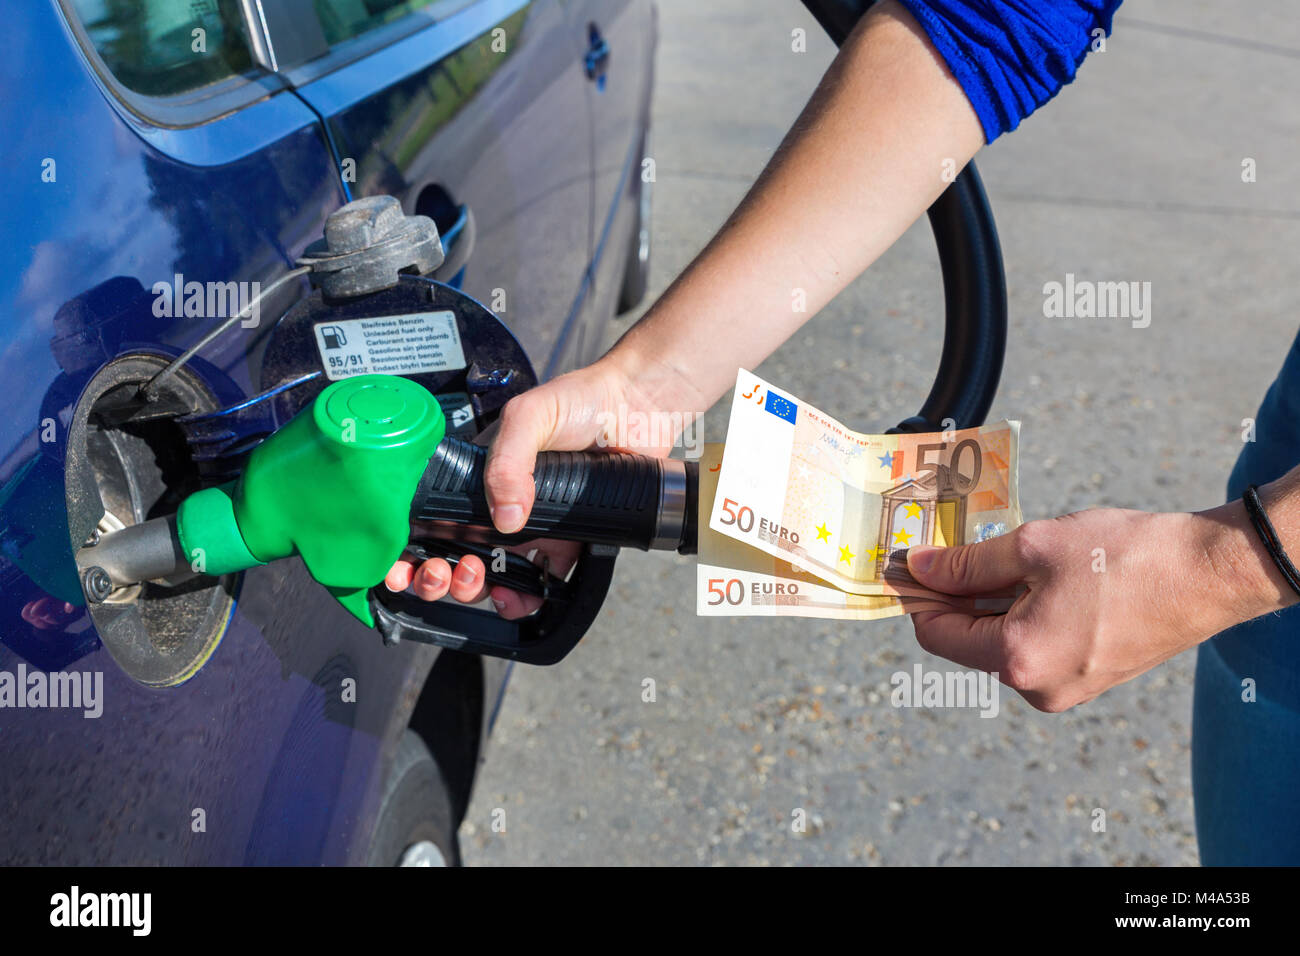 Woman fueling car tank and holding euro money Stock Photo